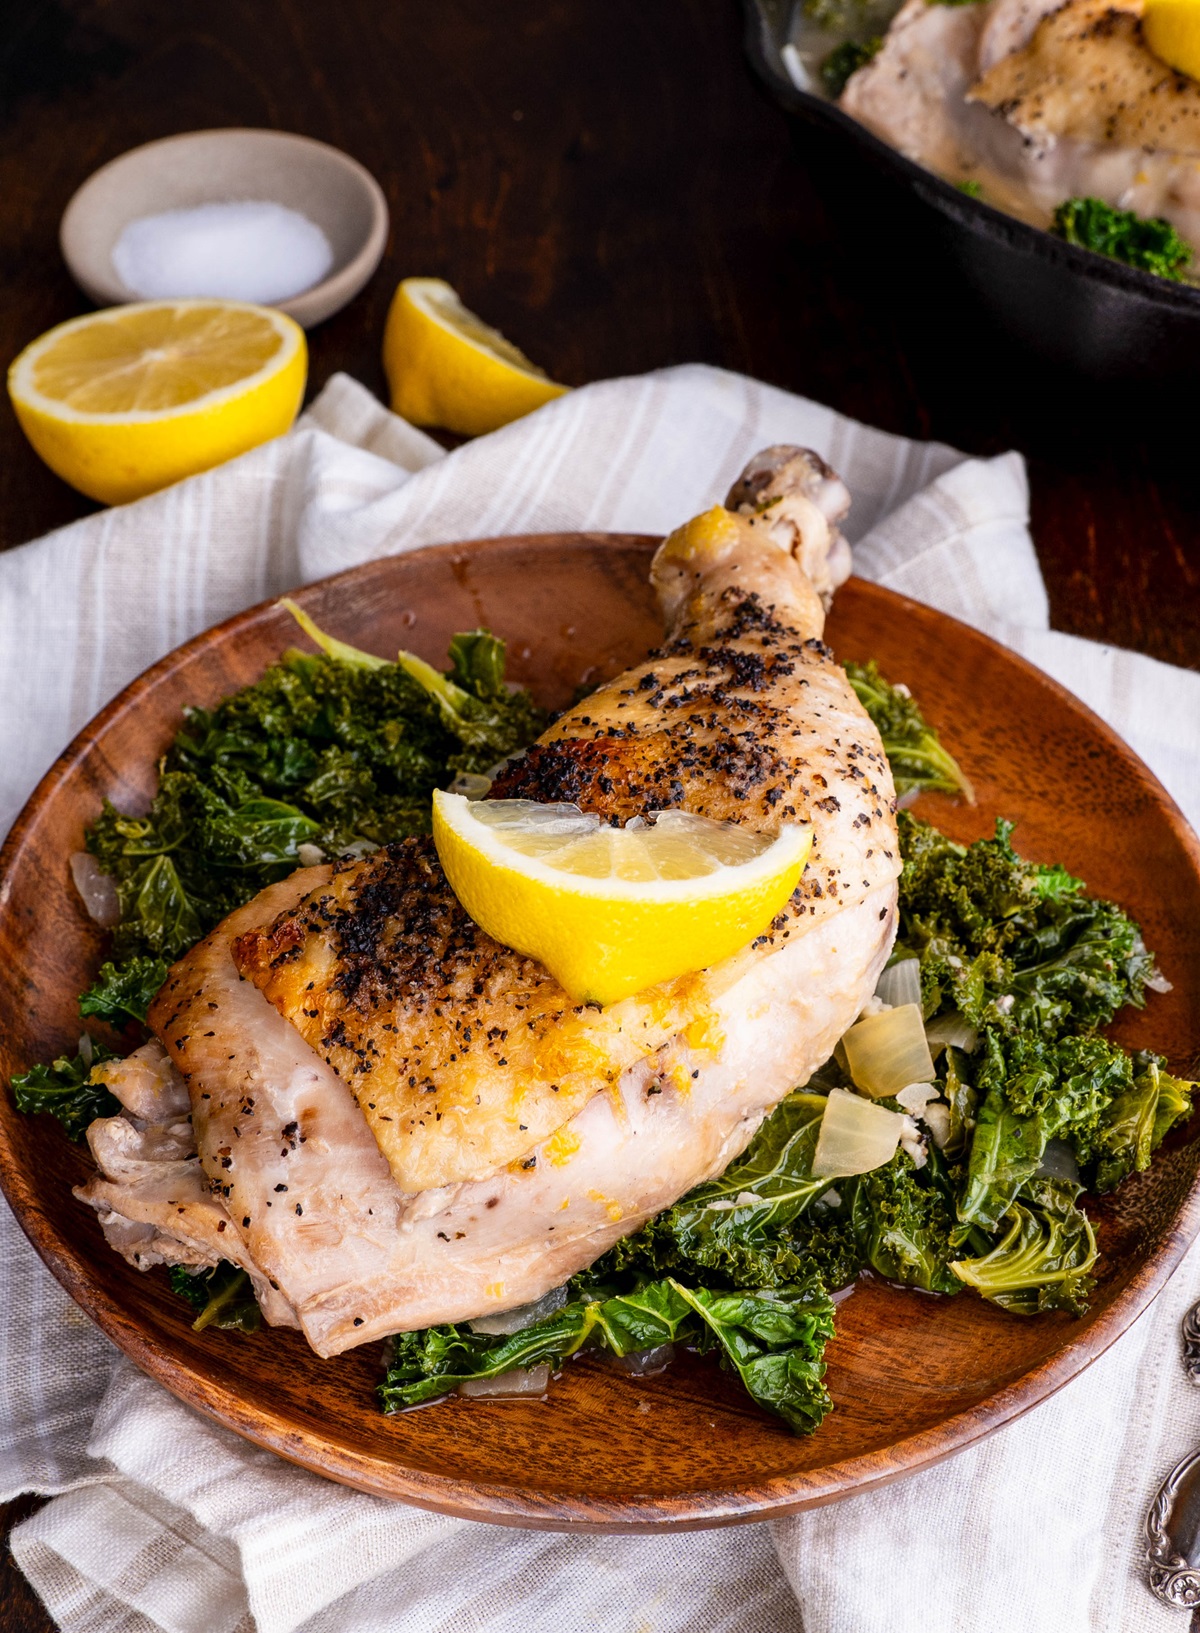 Braised chicken leg on a plate with kale